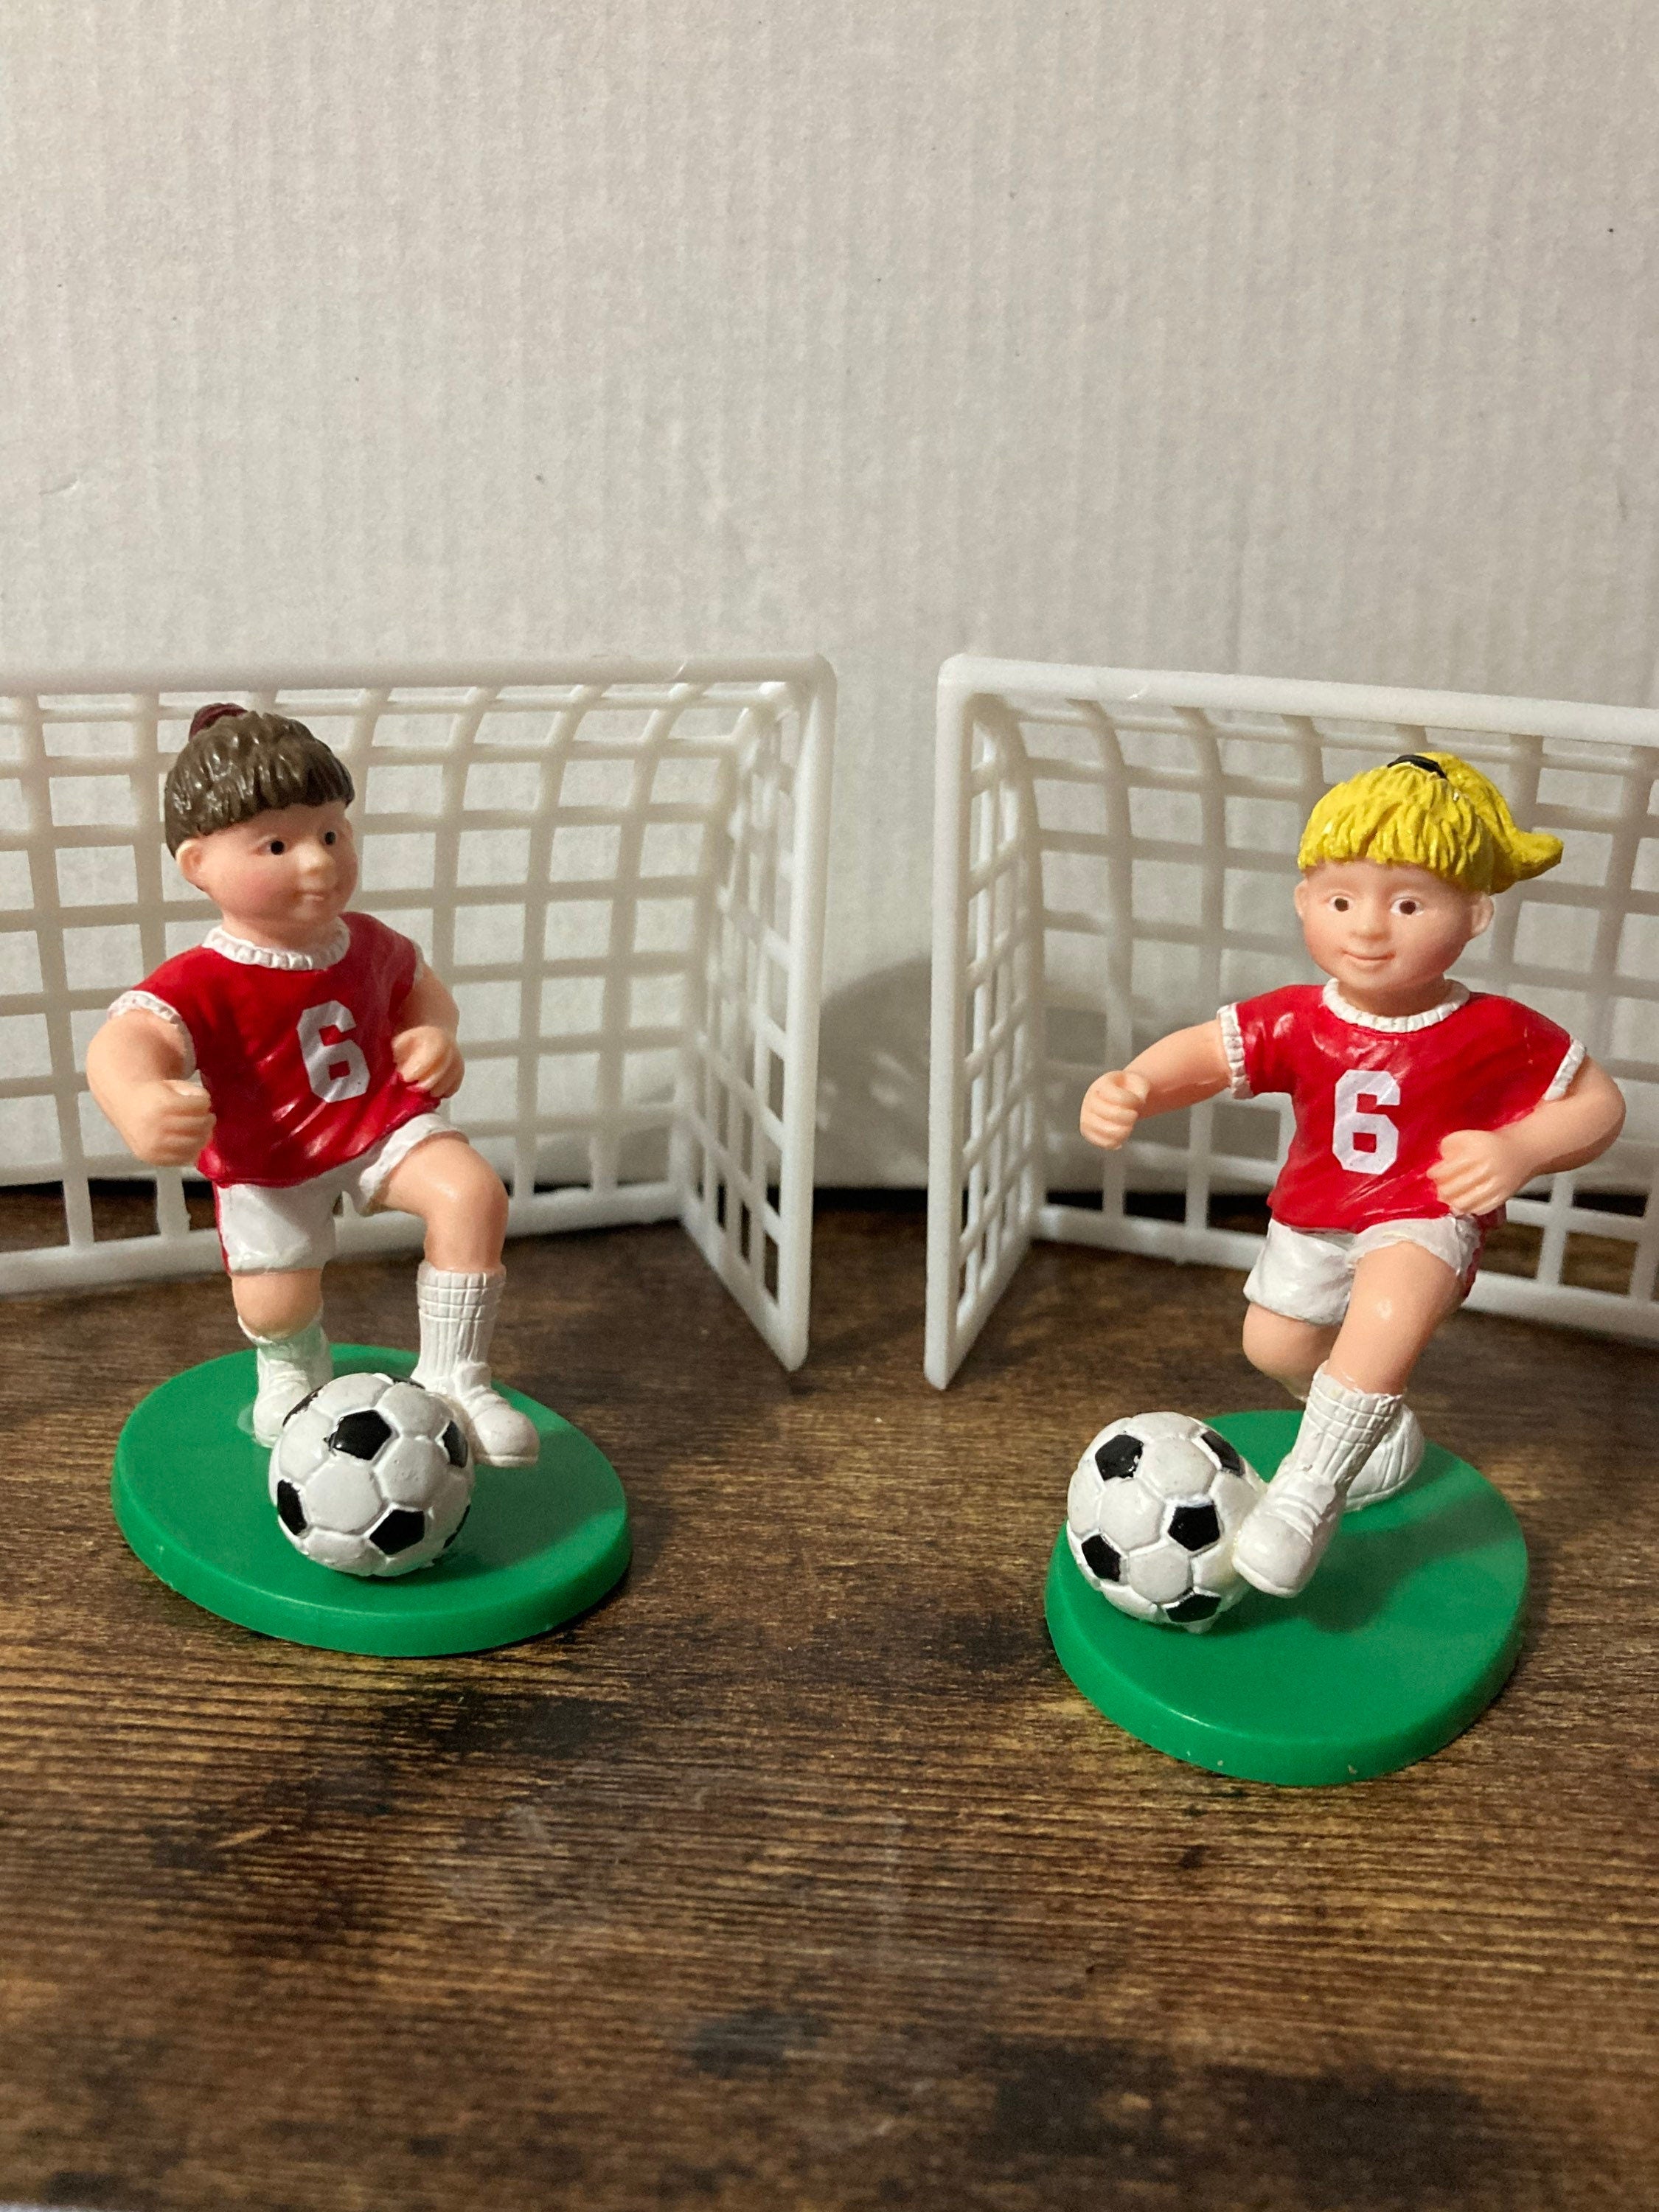 Buy Football Cake Toppers, Cake Insert Football Decor Football Cake  Decorations for Daily Use Online at Low Prices in India - Amazon.in